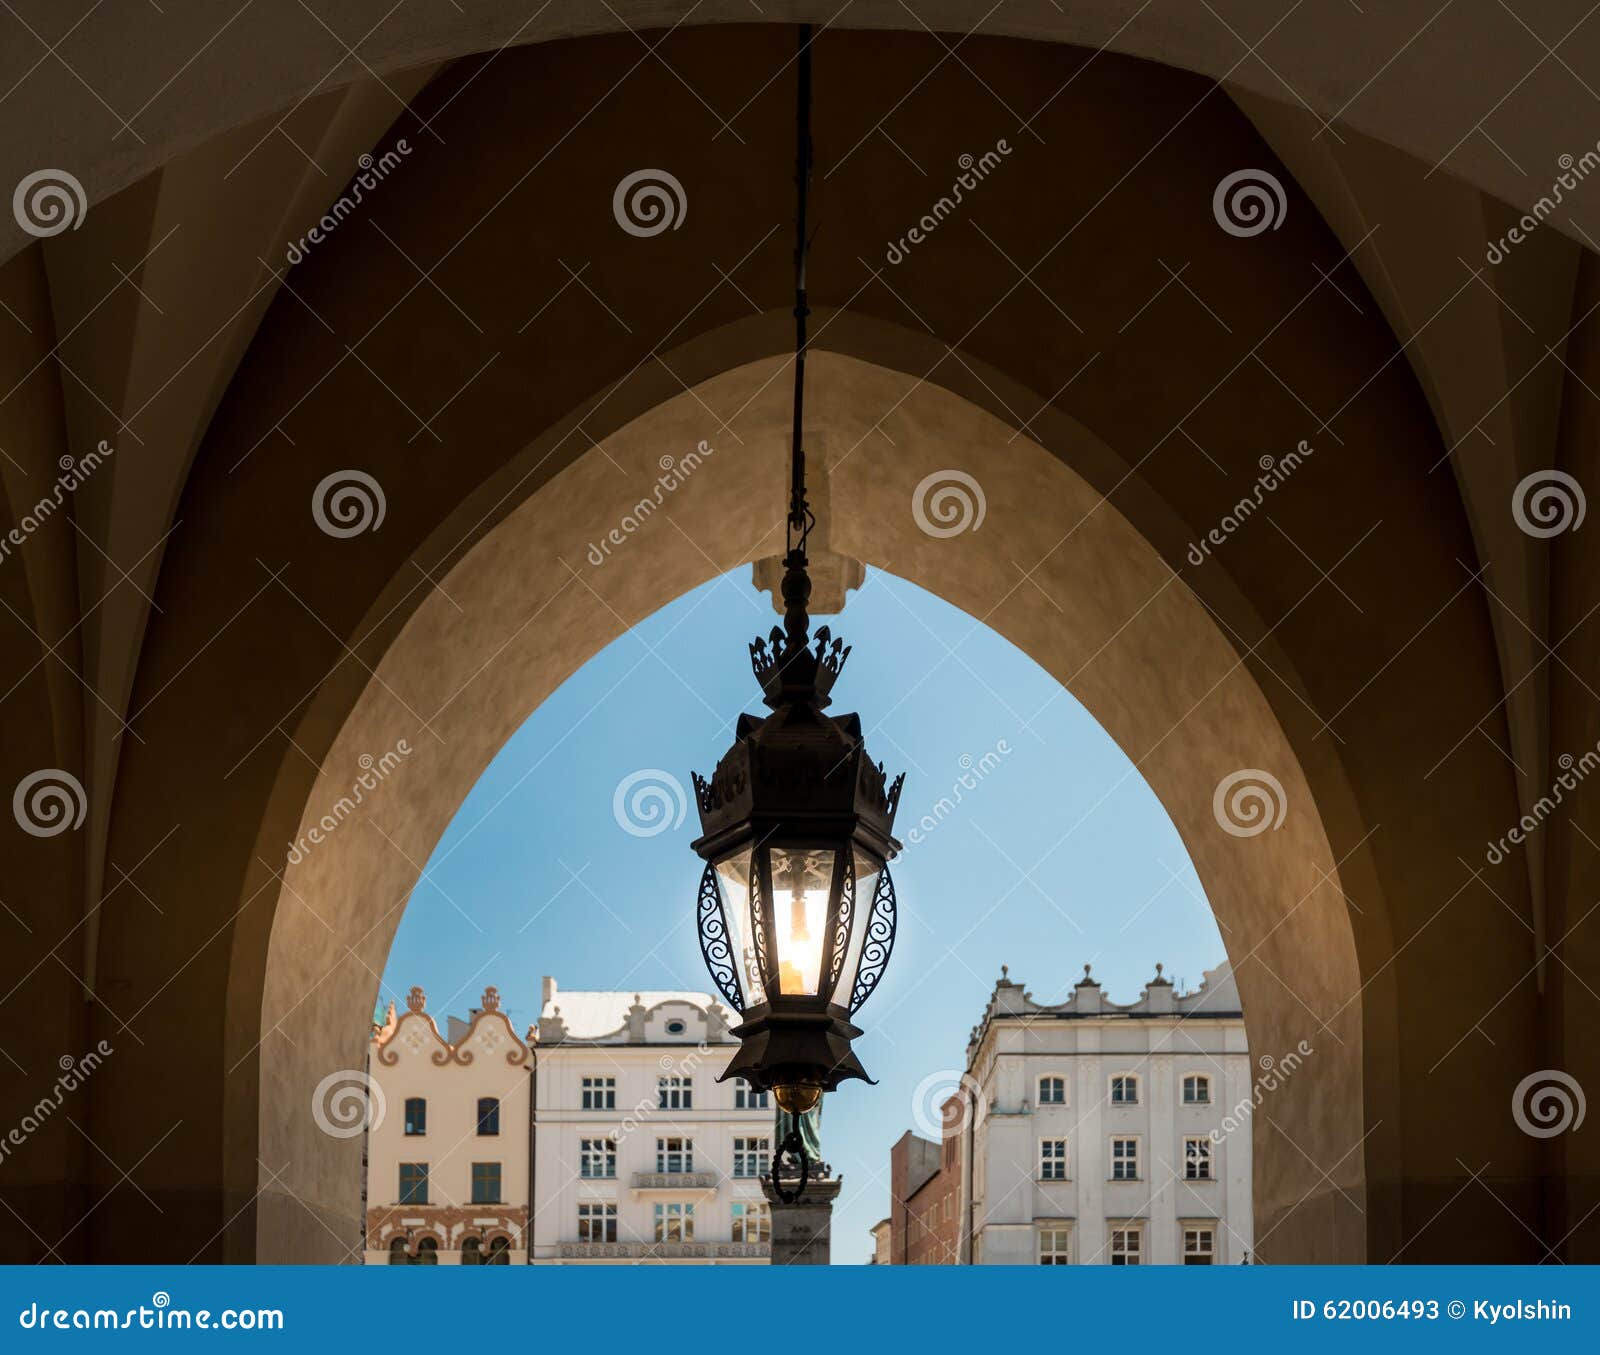 old lamp and krakow architecture. poland, europe.